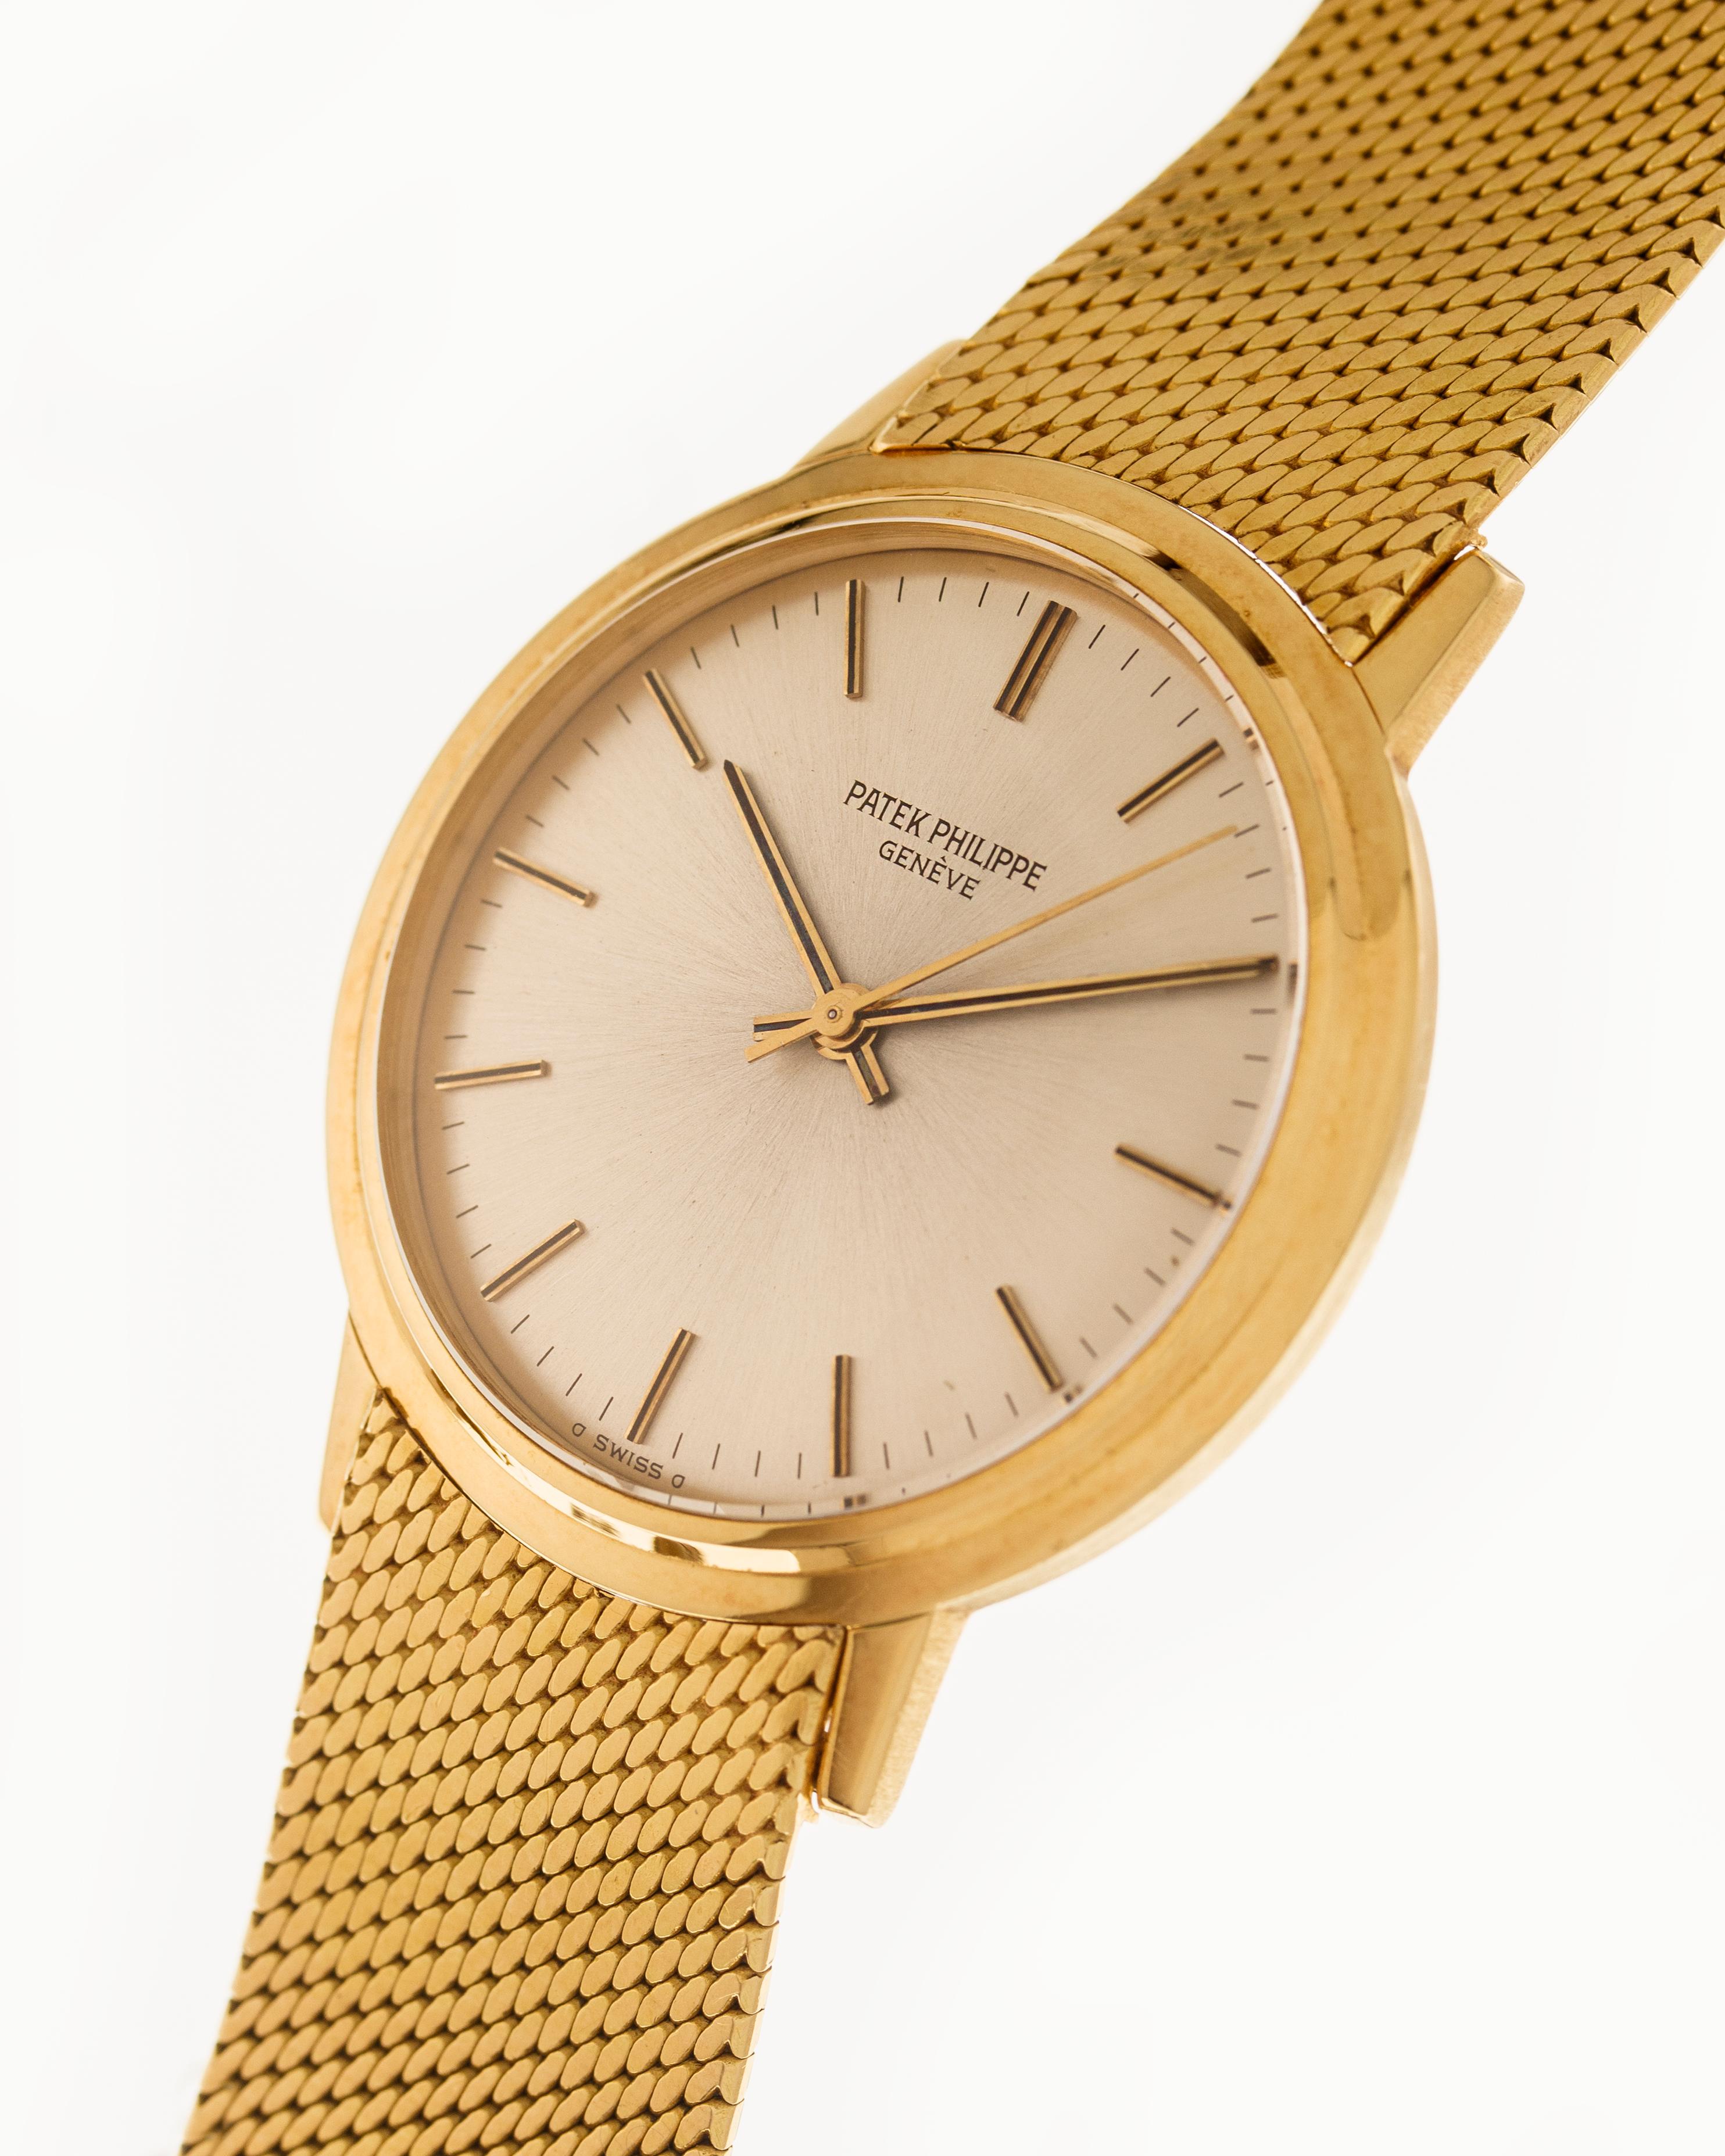 Case: 35.5 mm round-shaped in 18 kt yellow gold, water resistant, with screw back and back-winder

Dial: silvered with applied gold indexes and centre-seconds

Movement: self winding cal. 350

Year: 1970